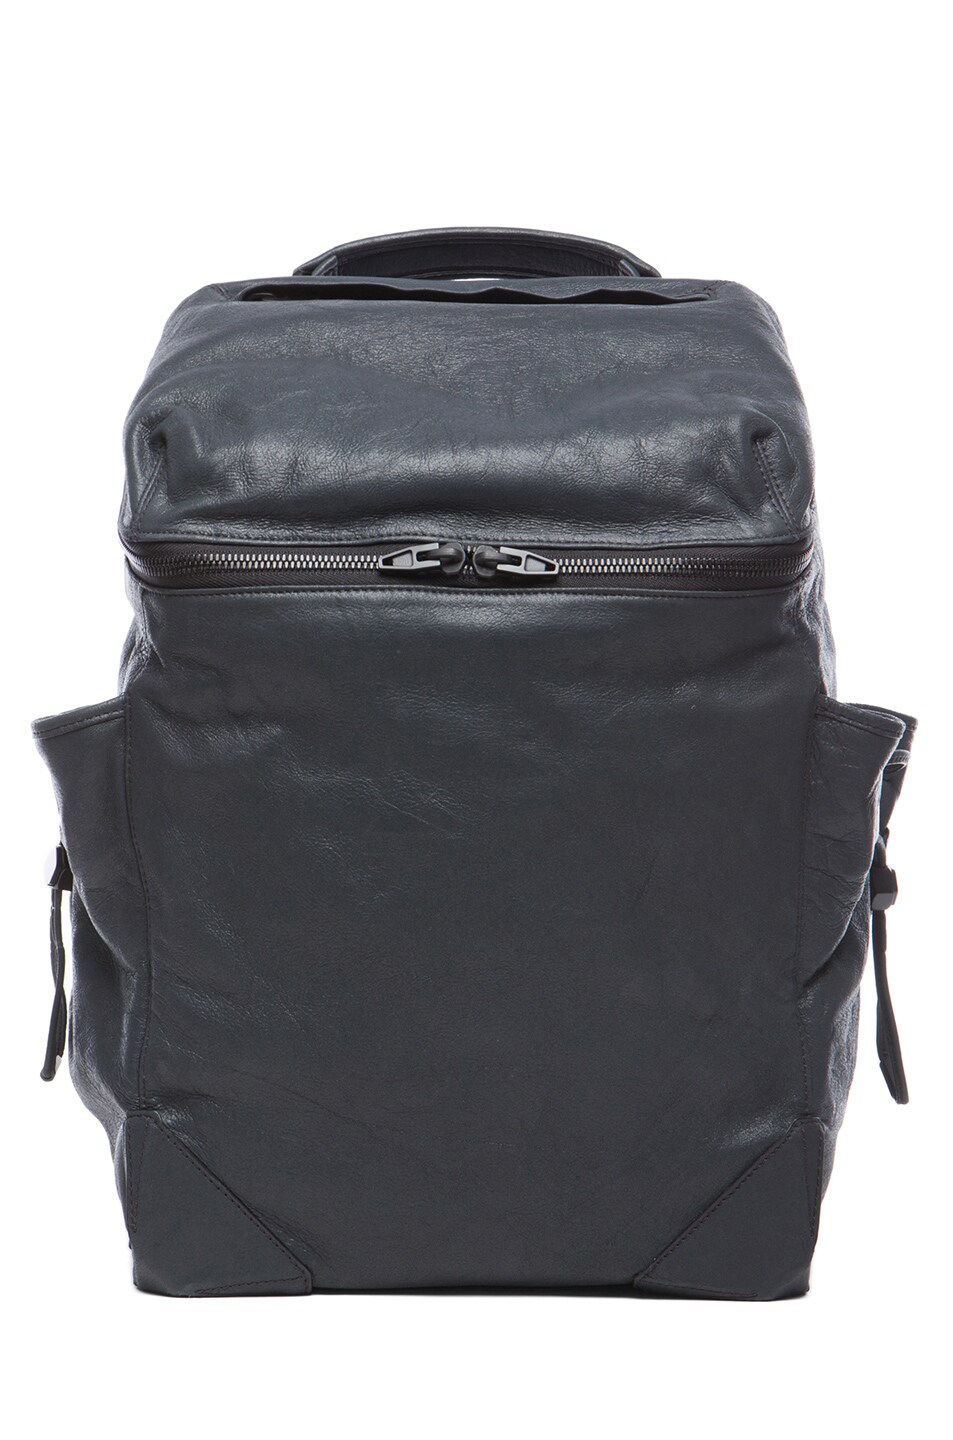 Image 1 of Alexander Wang Wallie Backpack in Sycamore